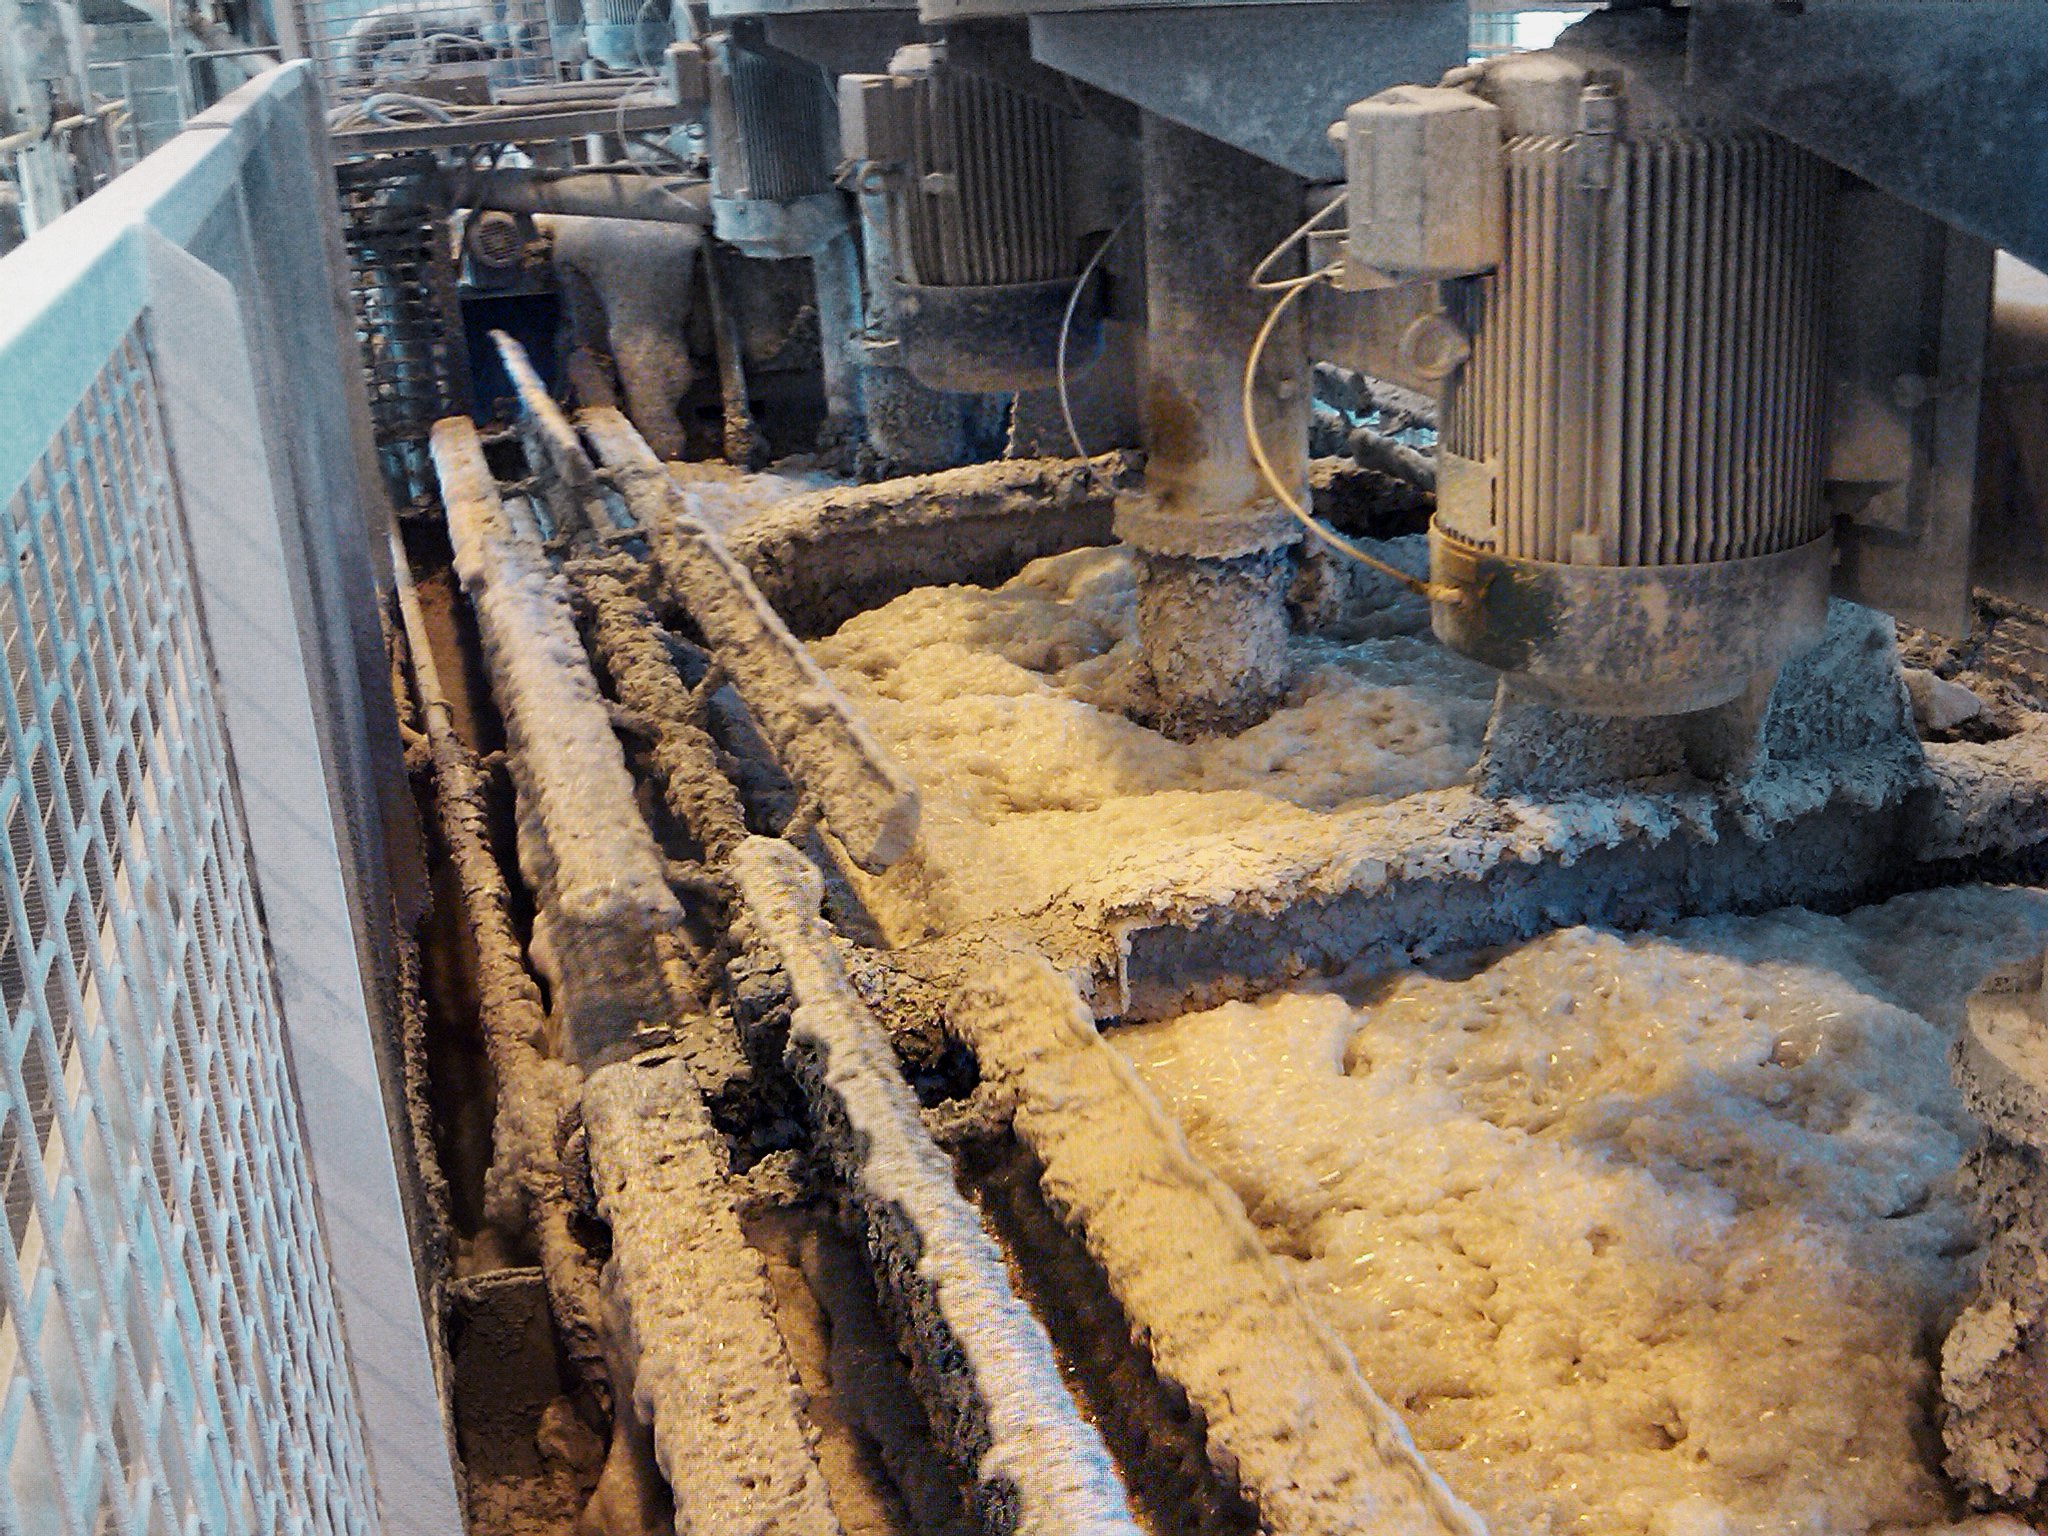 This is what a typical froth application might look like….messy!!!